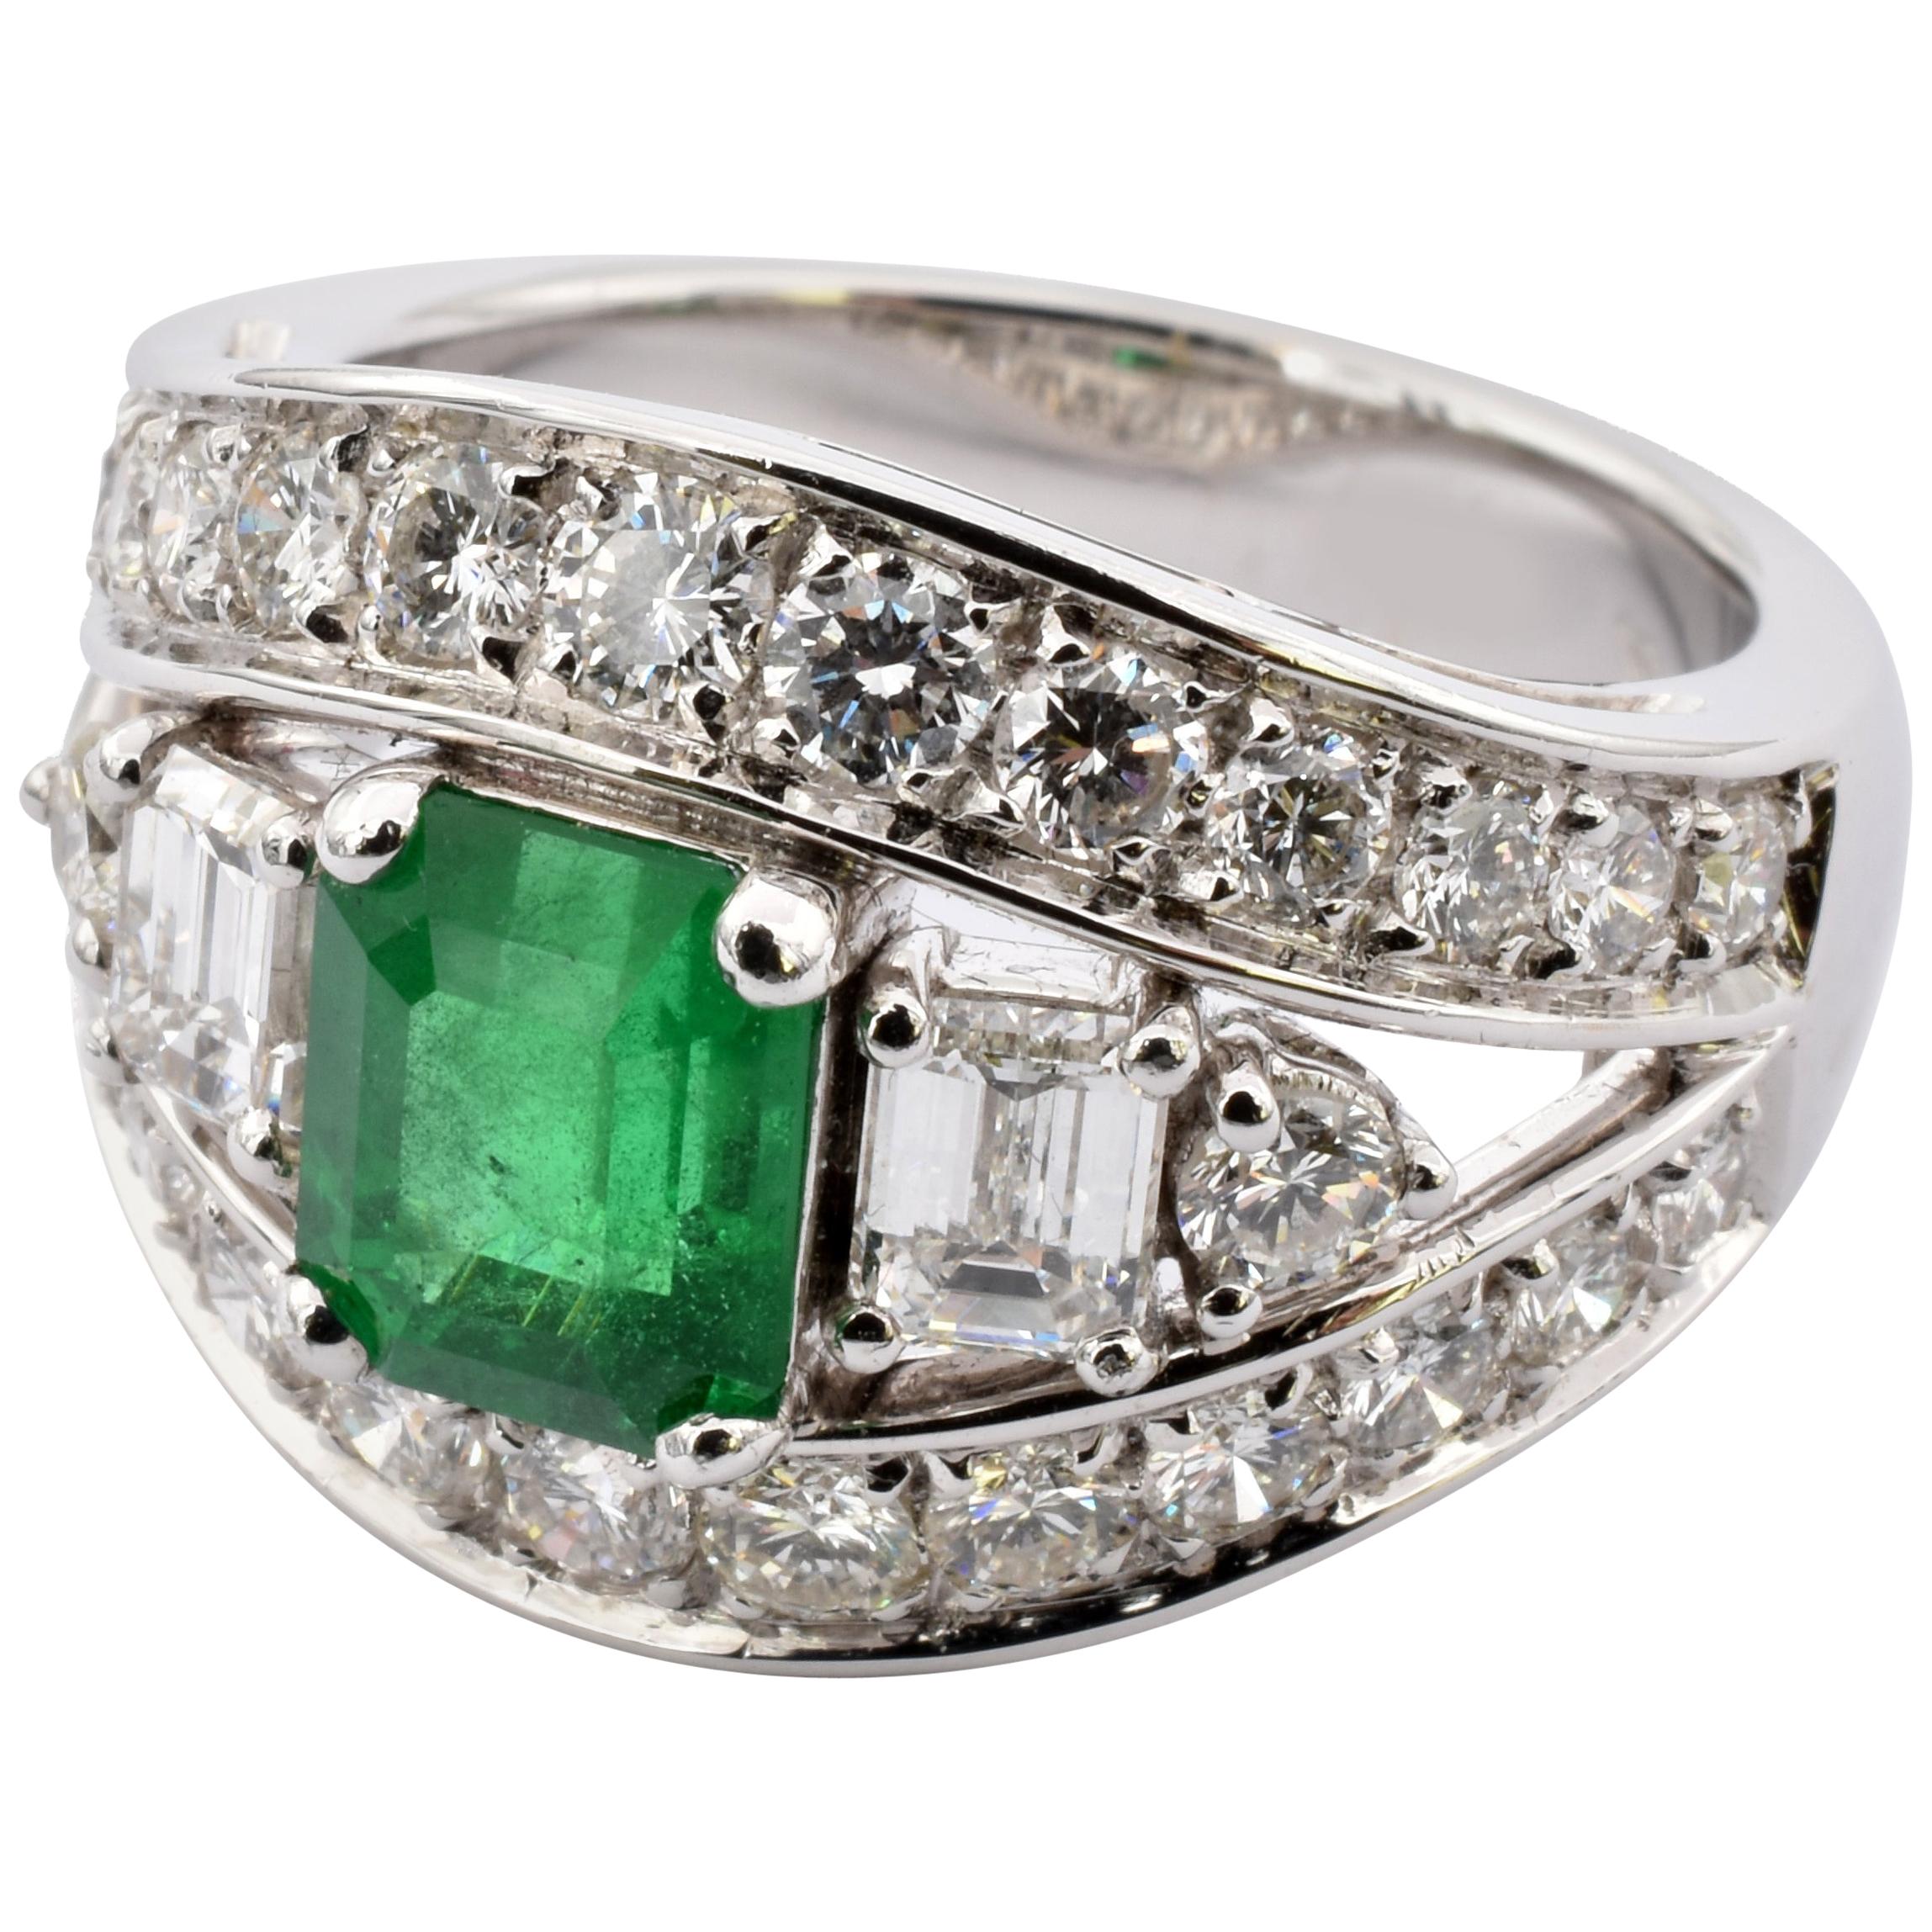 Brazilian Emerald and Diamonds White Gold Ring Made in Italy